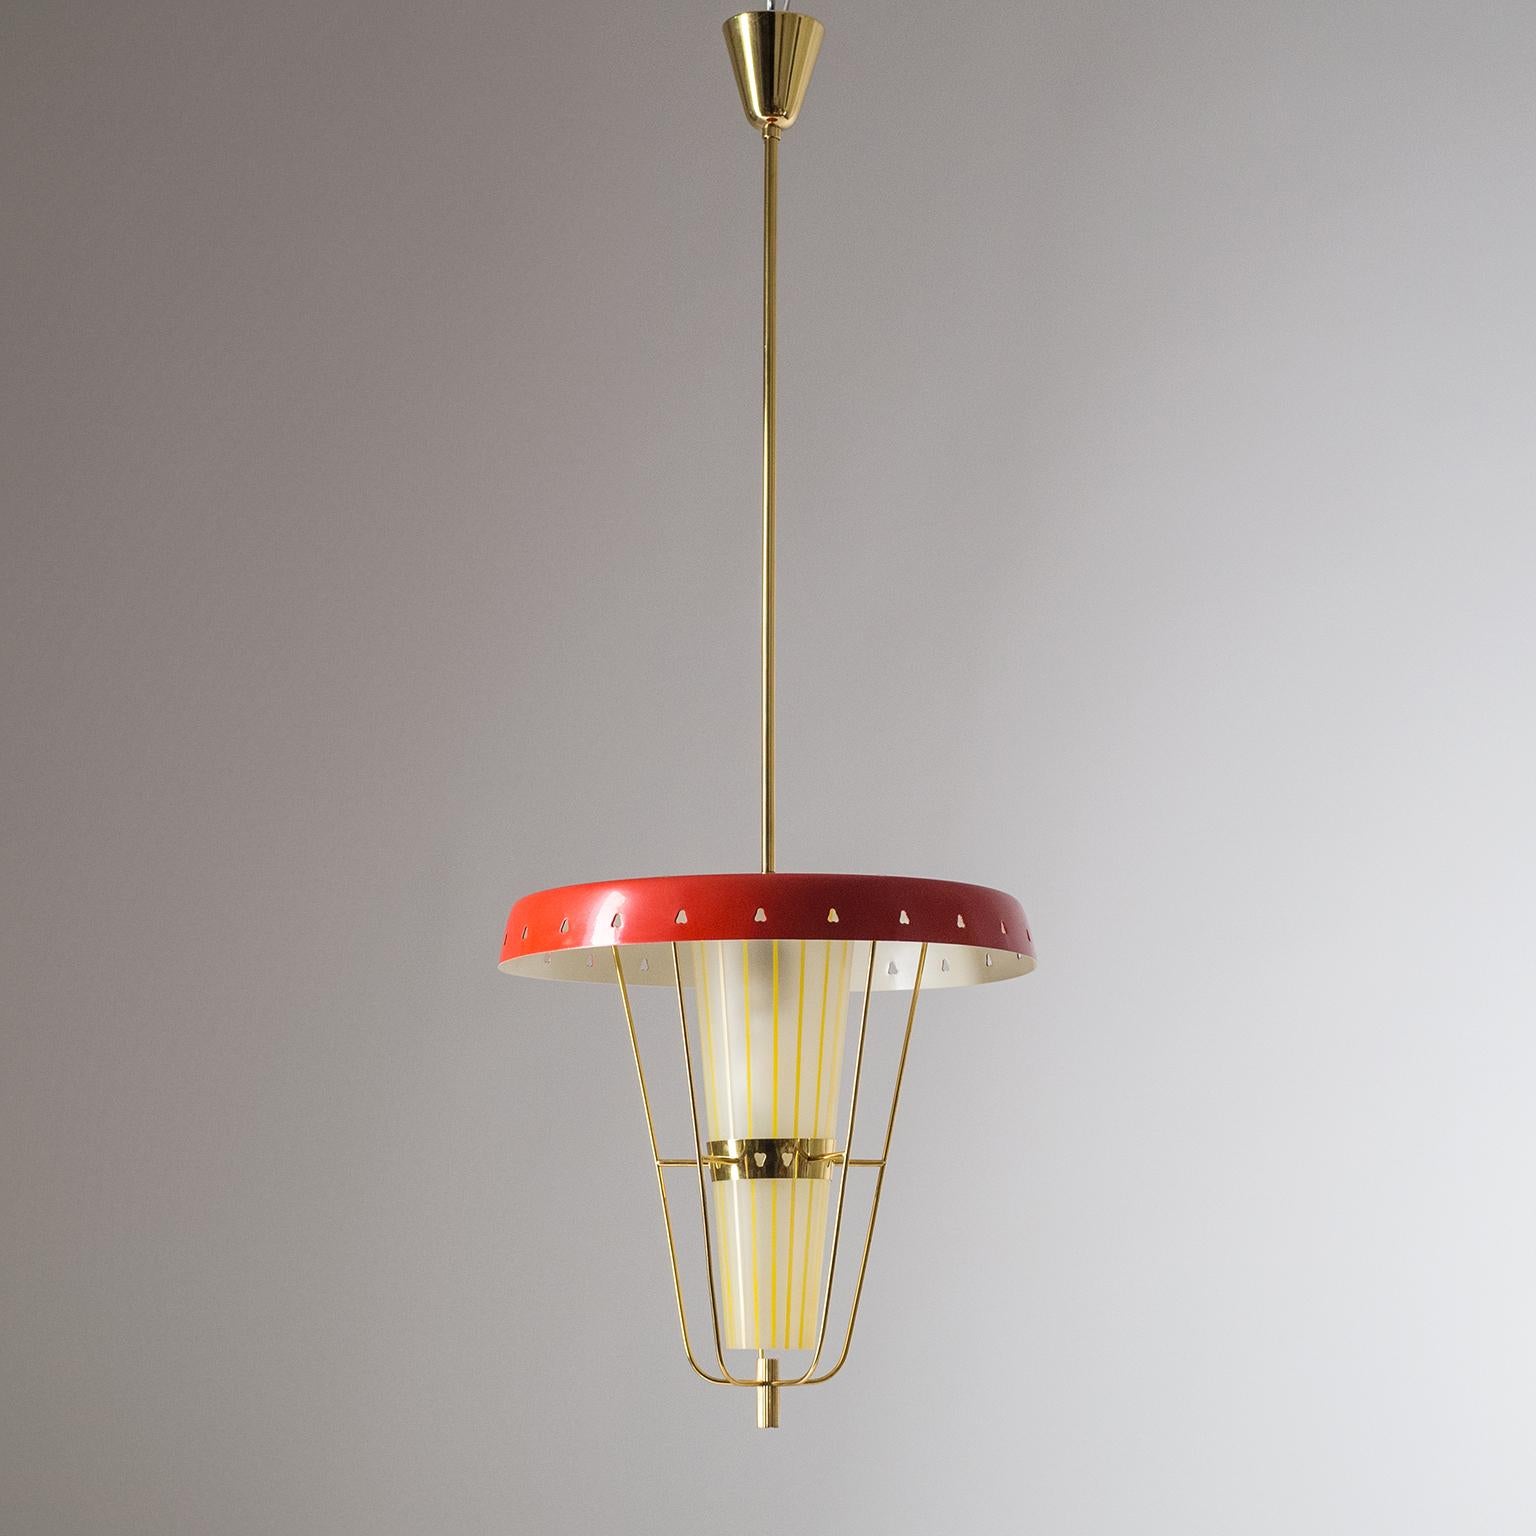 Rare Italian lantern from the 1950s. Wonderful modernist design with attention to detail: The unusual heart-shaped perforations in the large shade and the brass glass holder; the filigrane brass wire structure; the striped and conical glass